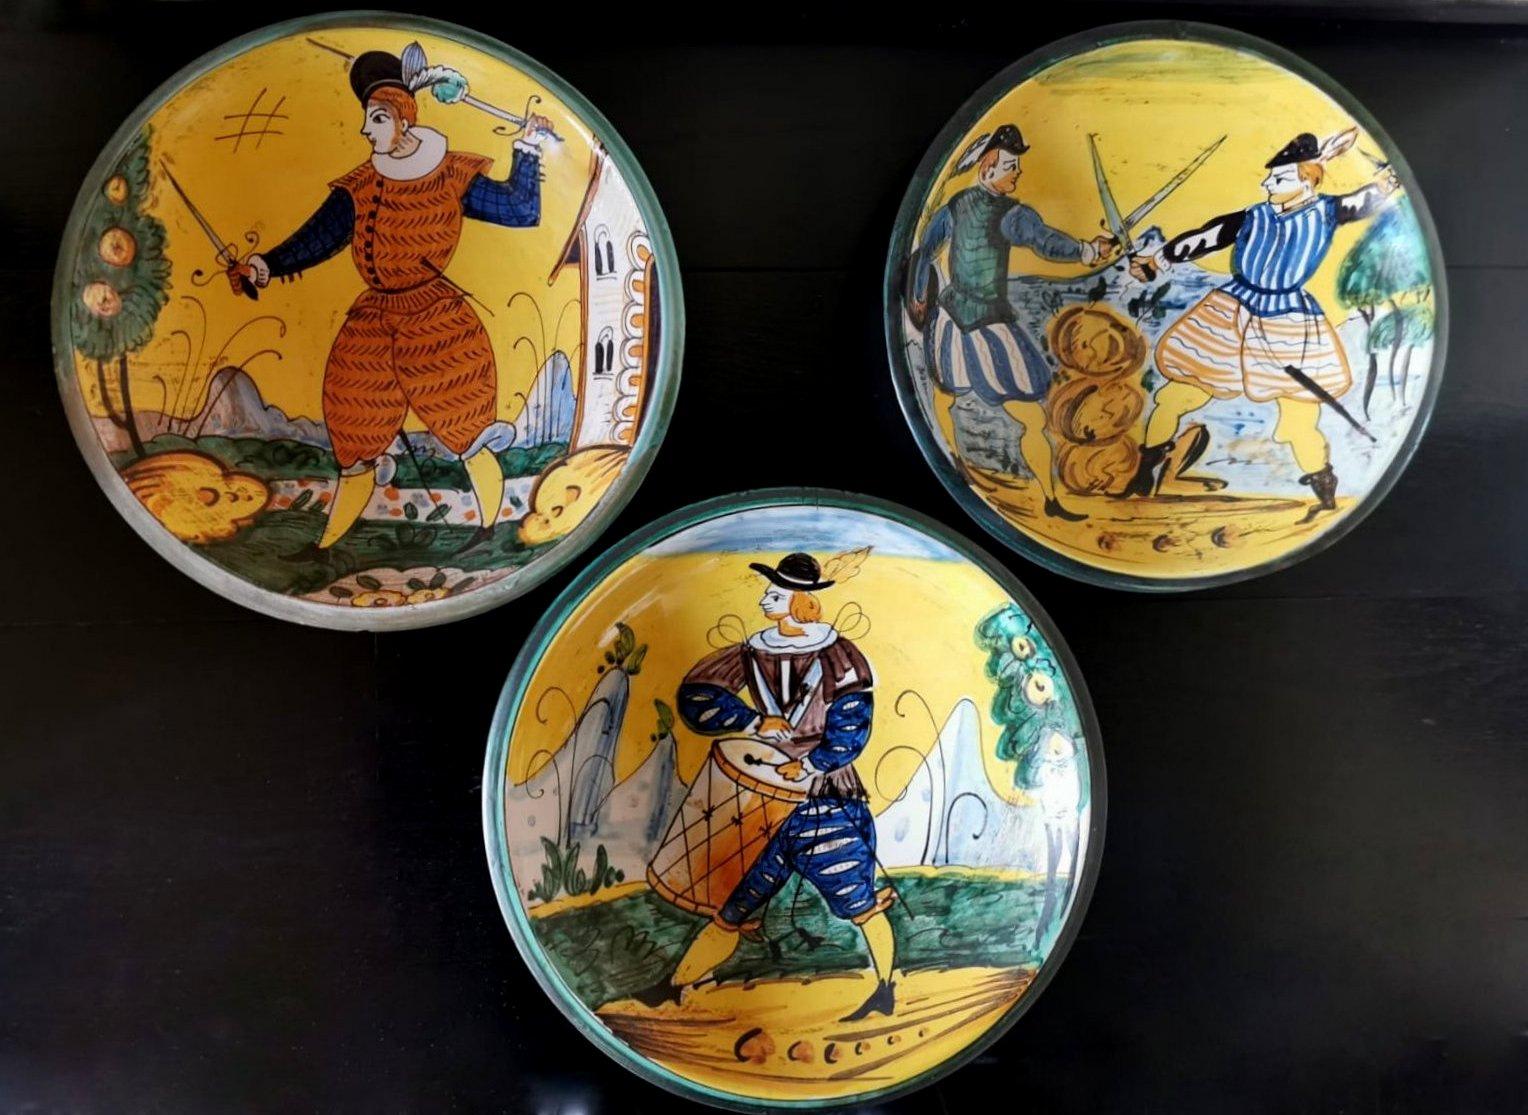 We kindly suggest you read the whole description, because with it we try to give you detailed technical and historical information to guarantee the authenticity of our objects. Three delightful and colorful round ceramic wall plates; they were